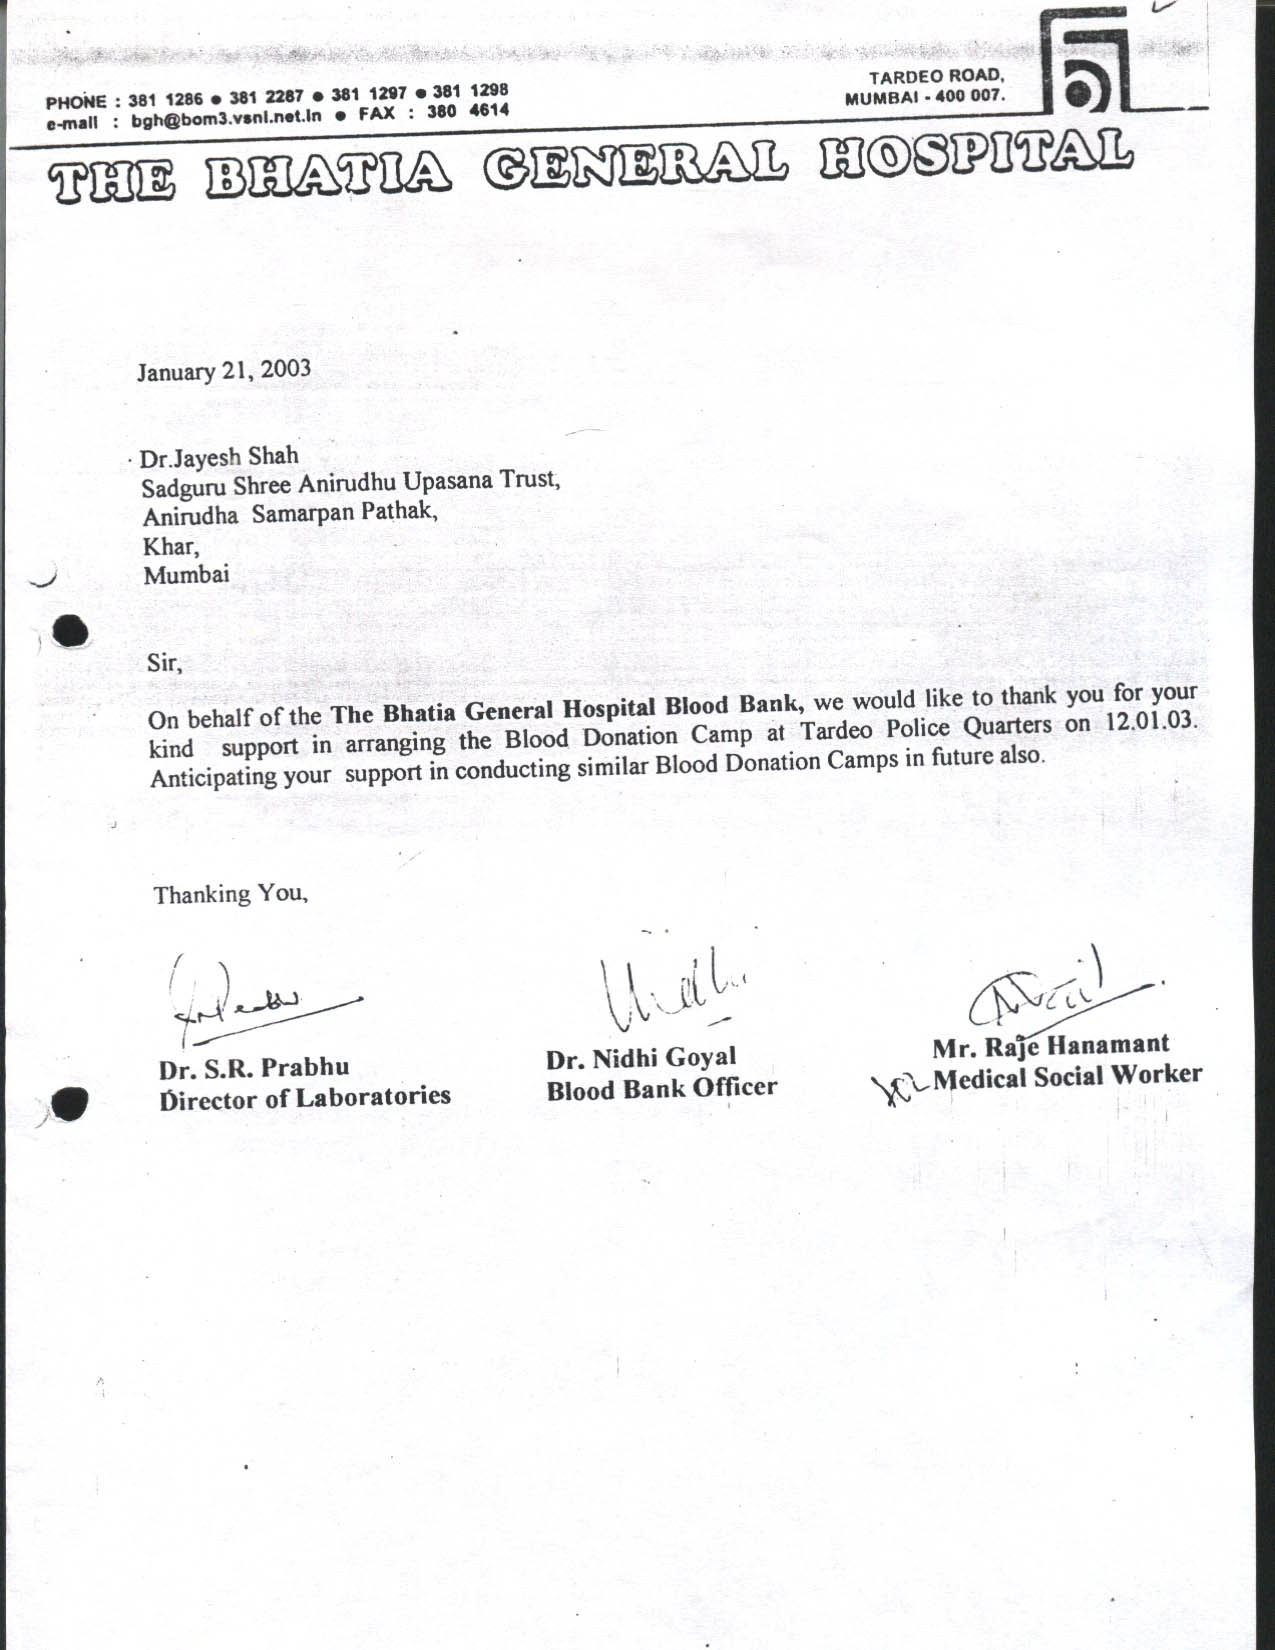 Appreciation-Letter from Bhatia General Hospital 2003-for-Aniruddhafoundation-Compassion-Social-services